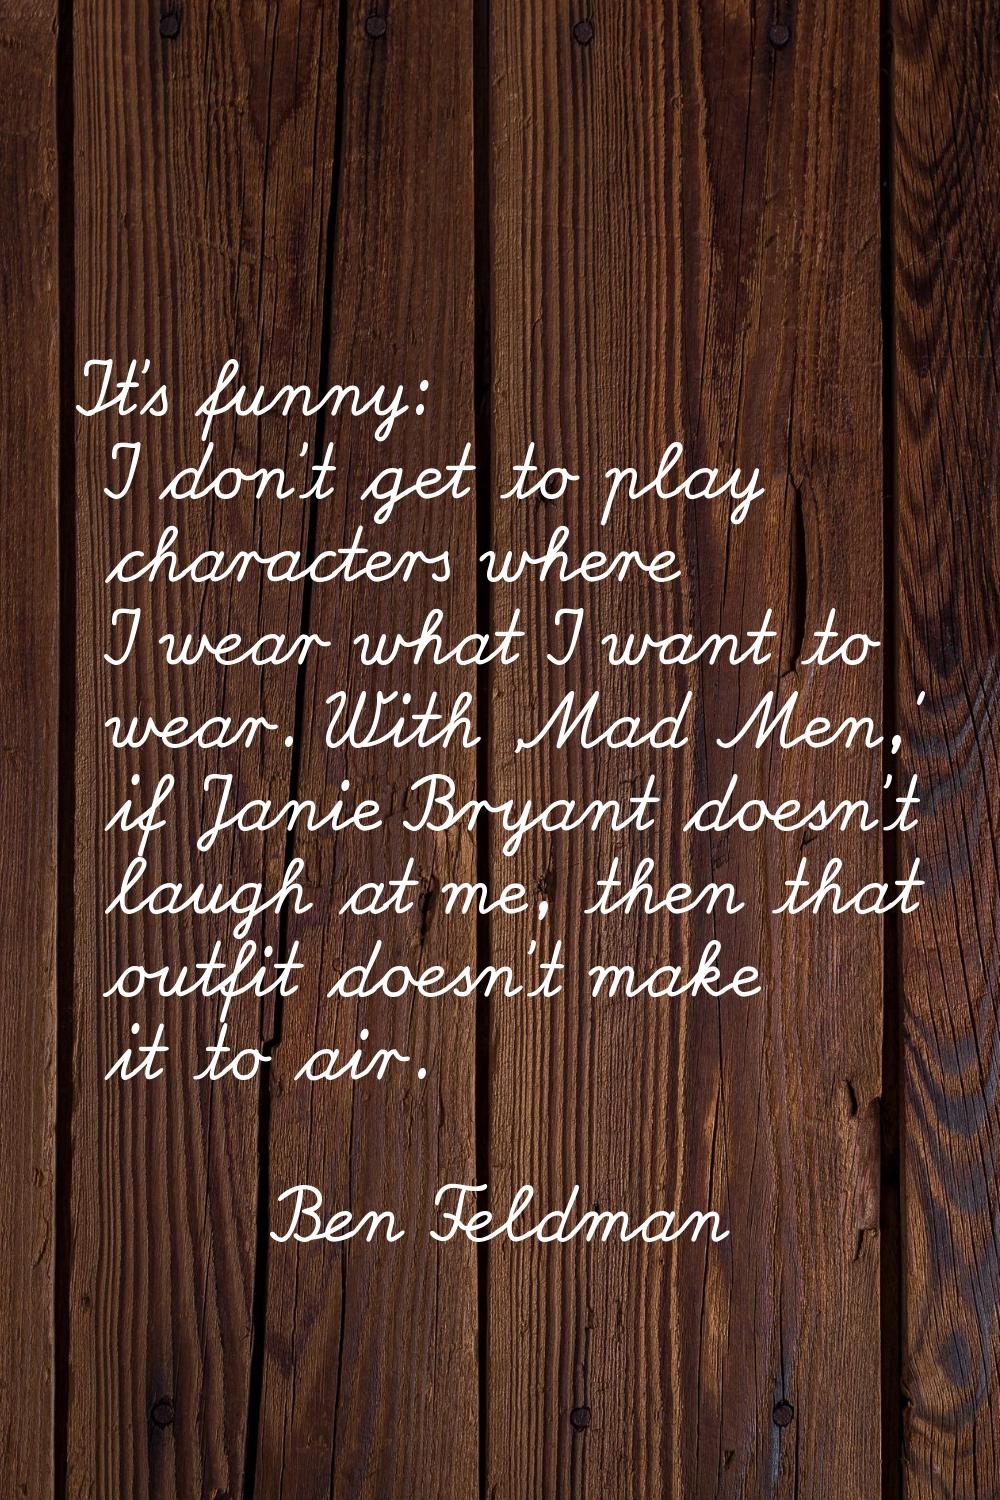 It's funny: I don't get to play characters where I wear what I want to wear. With 'Mad Men,' if Jan